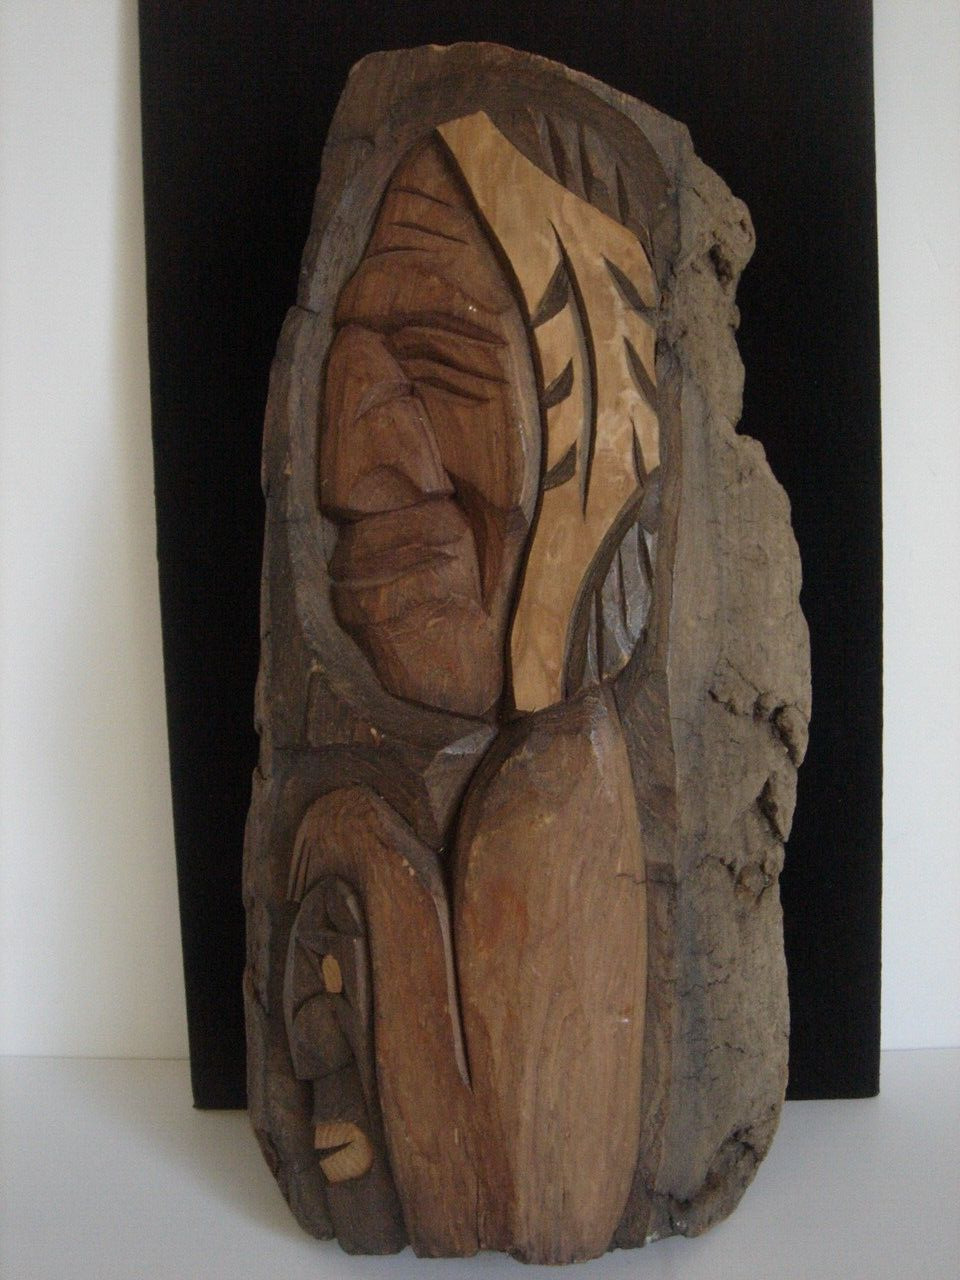 Art Wanik Carved Driftwood Folk Art Hand Crafted Solid Wood Hand Painted Canada